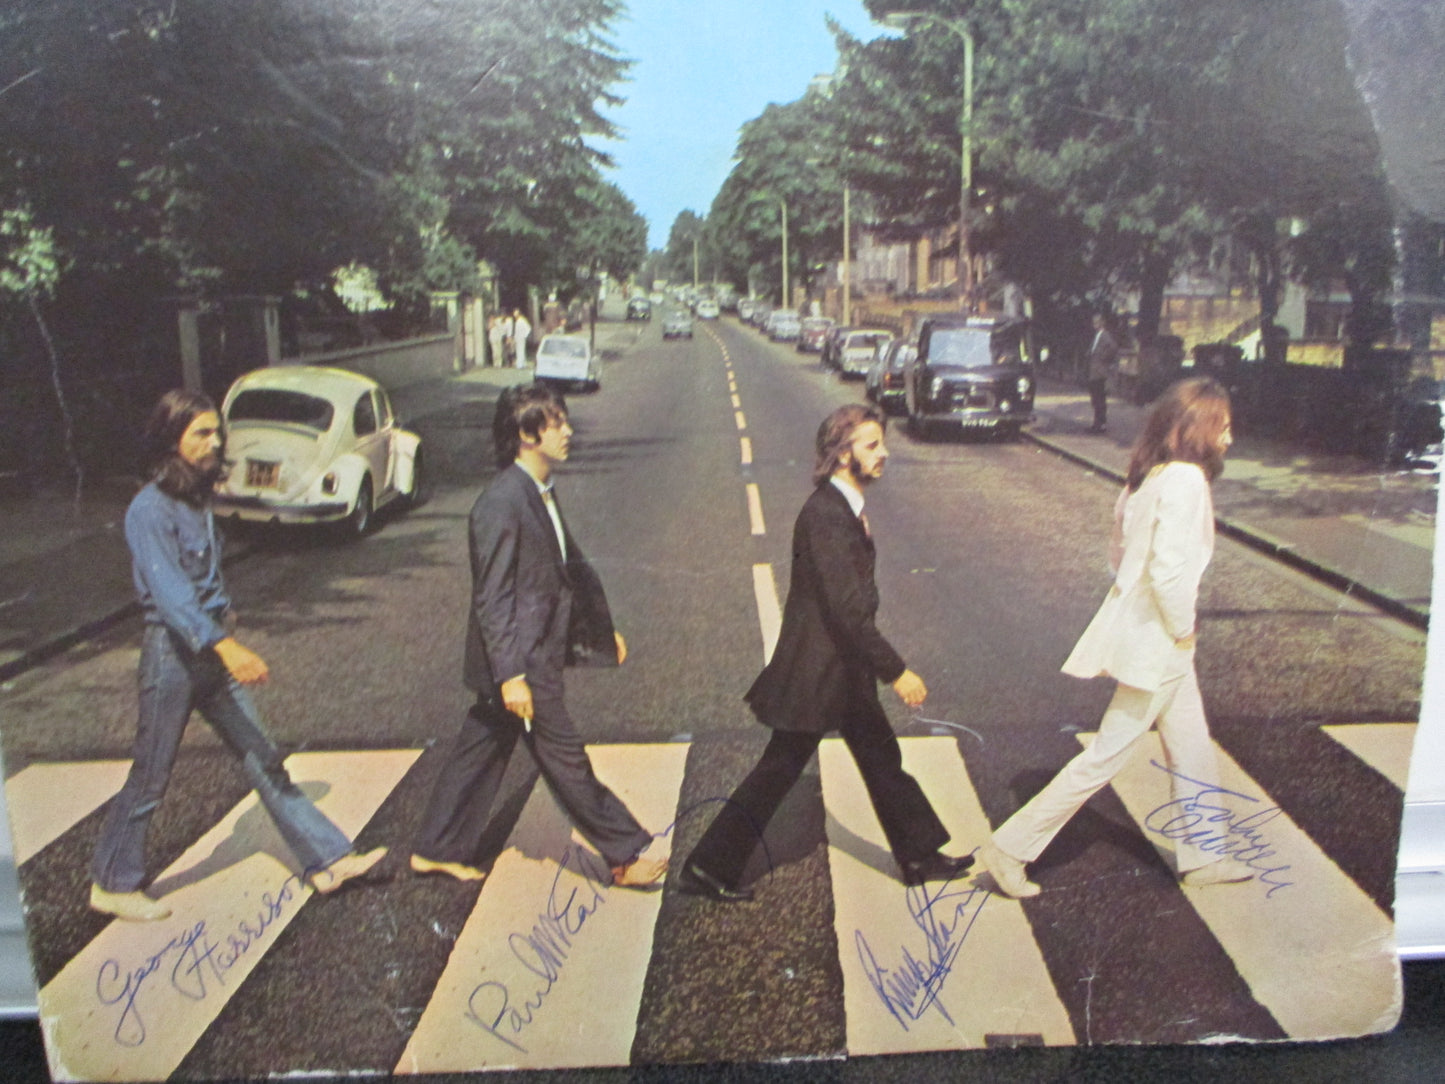 Beatles Abby Road Album Signed by All 4 Beatles Fab 4